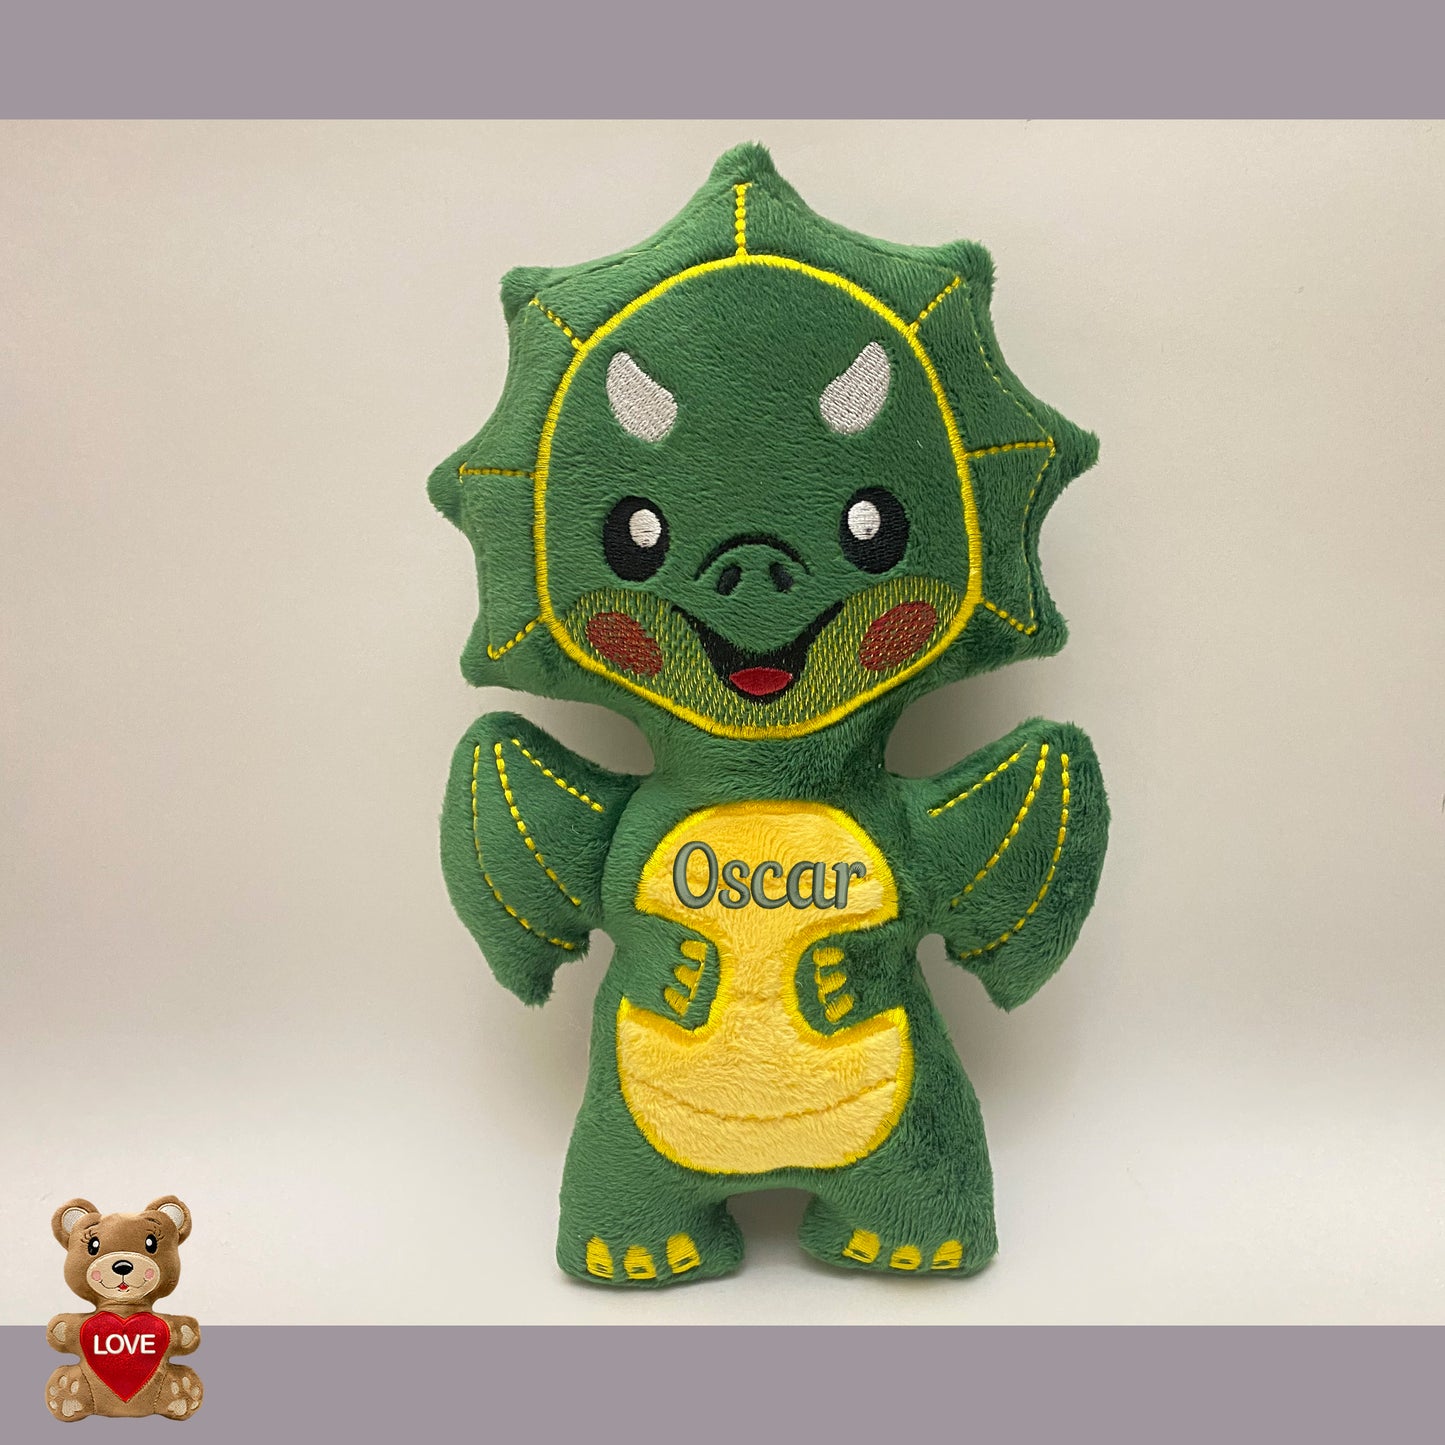 Personalised Green Dragon Stuffed toy ,Super cute personalised soft plush toy, Personalised Gift, Unique Personalized Birthday Gifts , Custom Gifts For Children